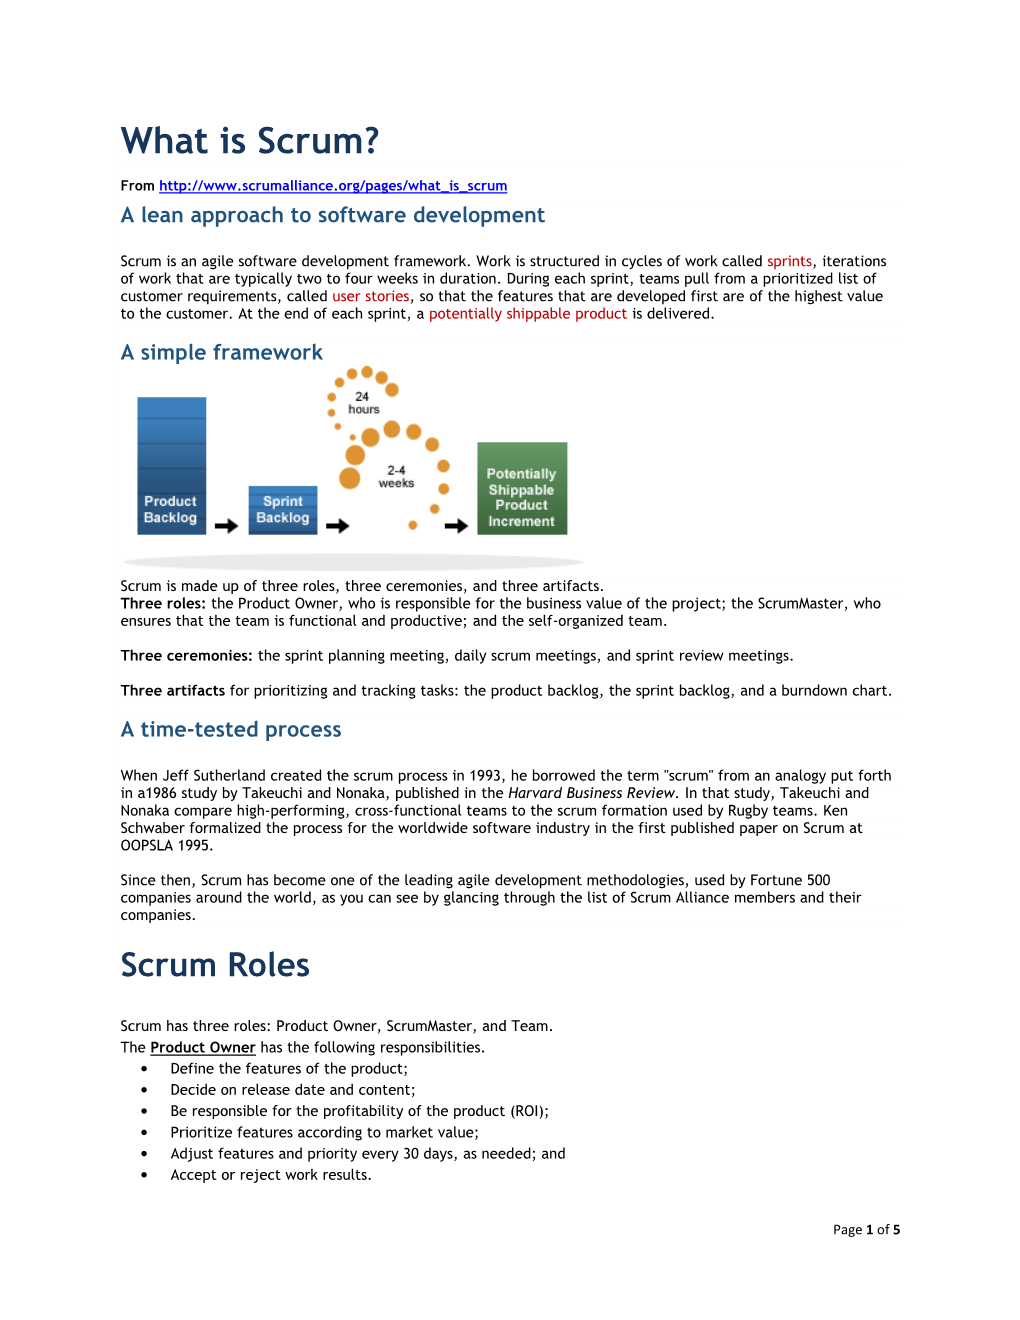 What Is Scrum? from a Lean Approach to Software Development